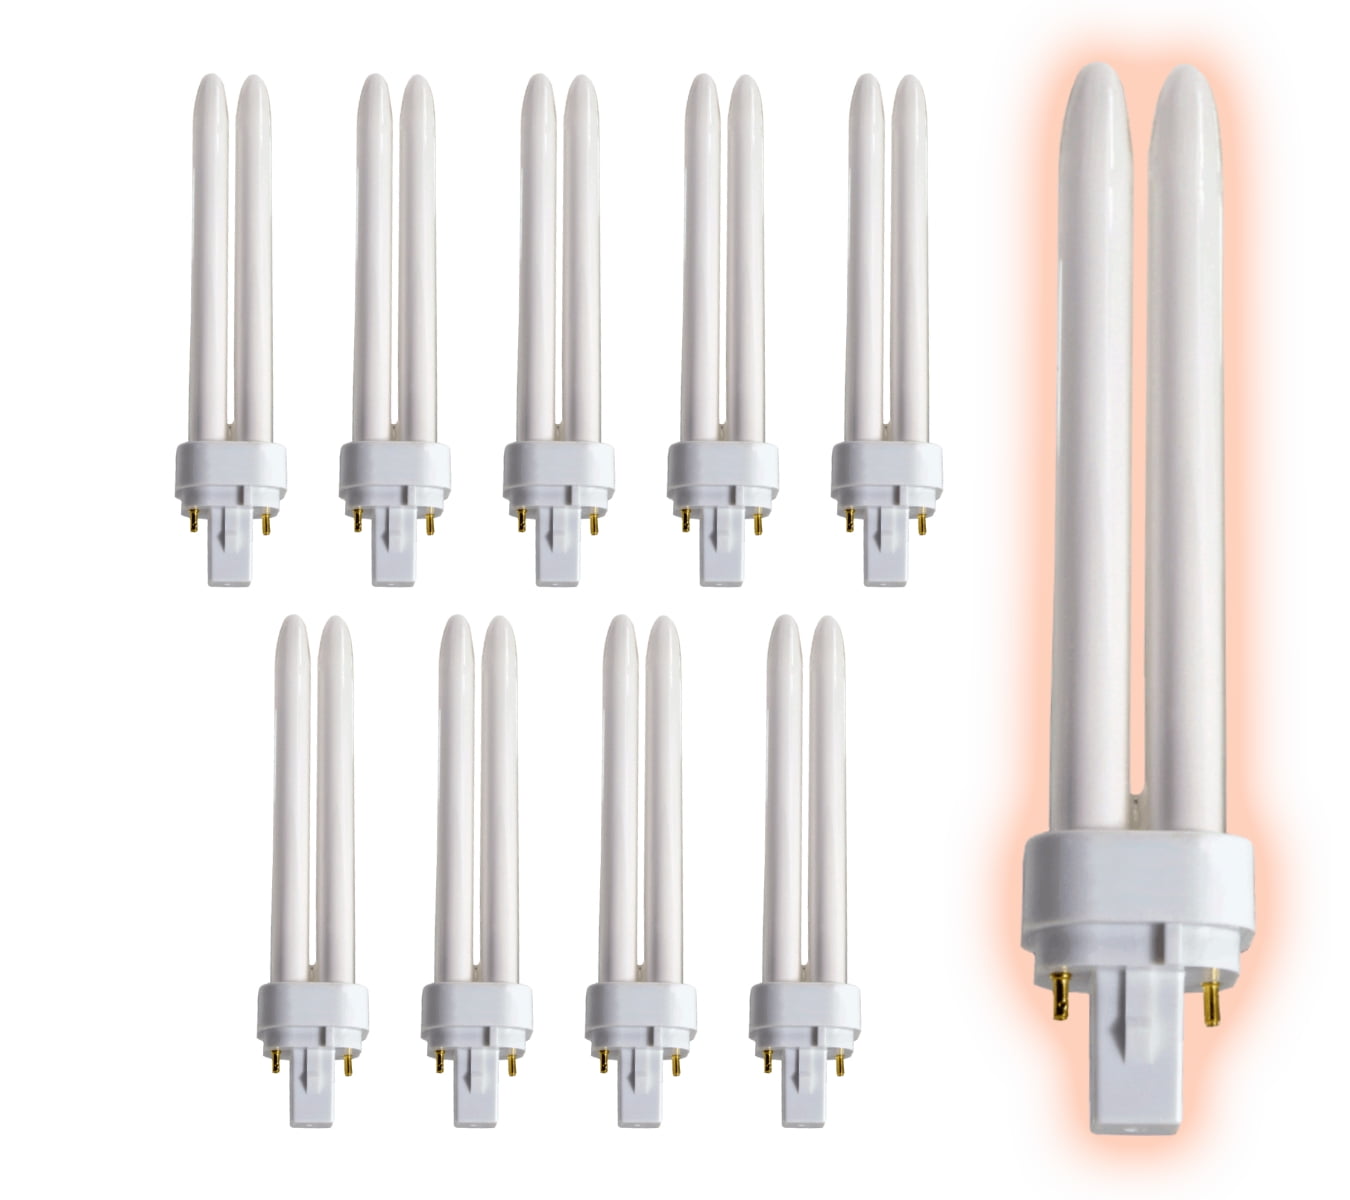 18W CFL light bulbs 2 pin low energy fluorescent lamps cool white BELL x 10